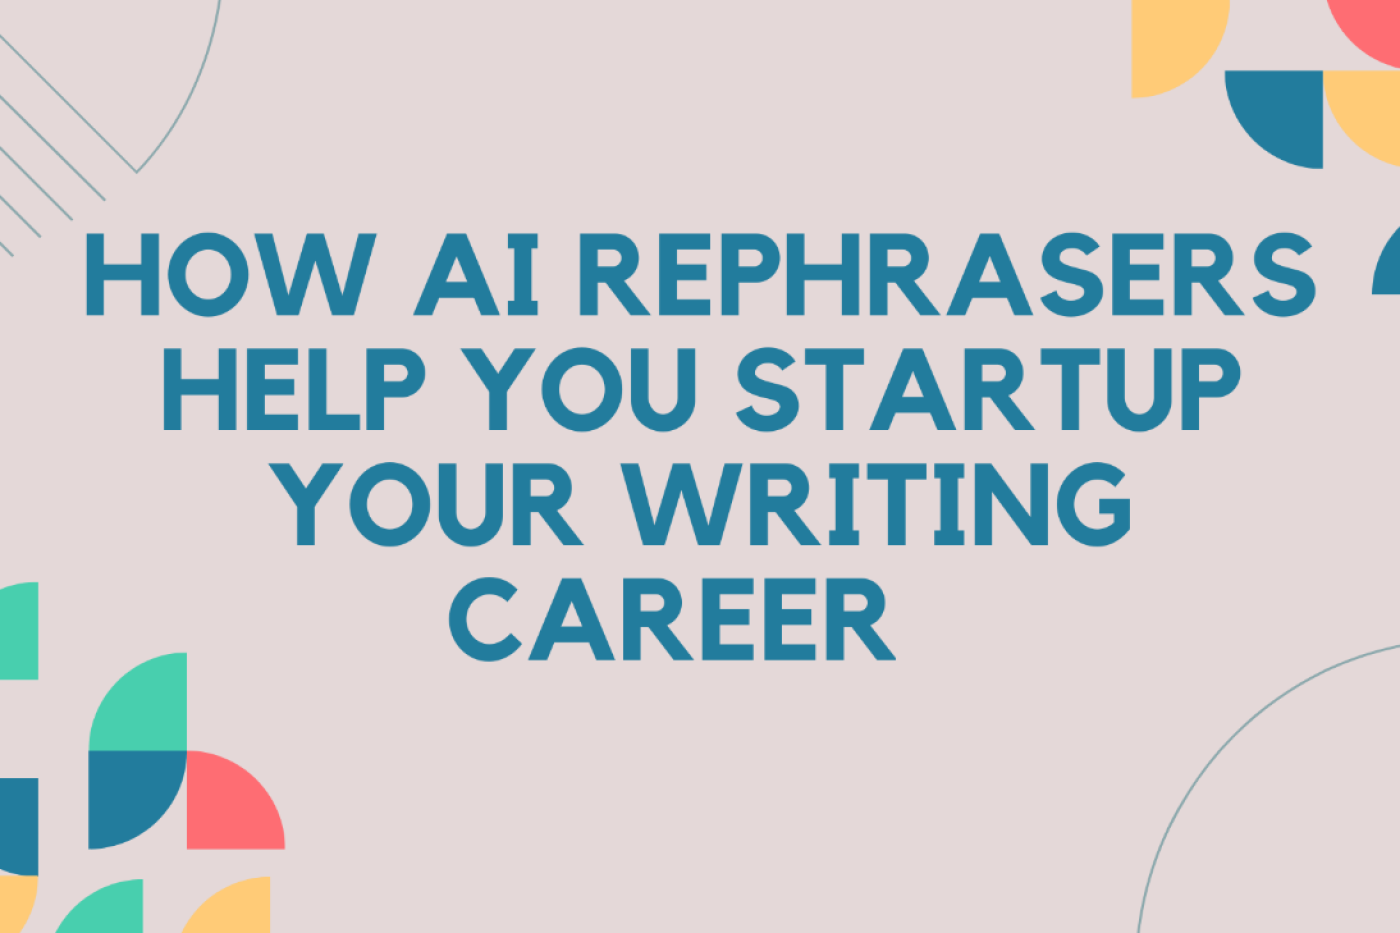 How AI Rephrasers Help You Startup Your Writing Career